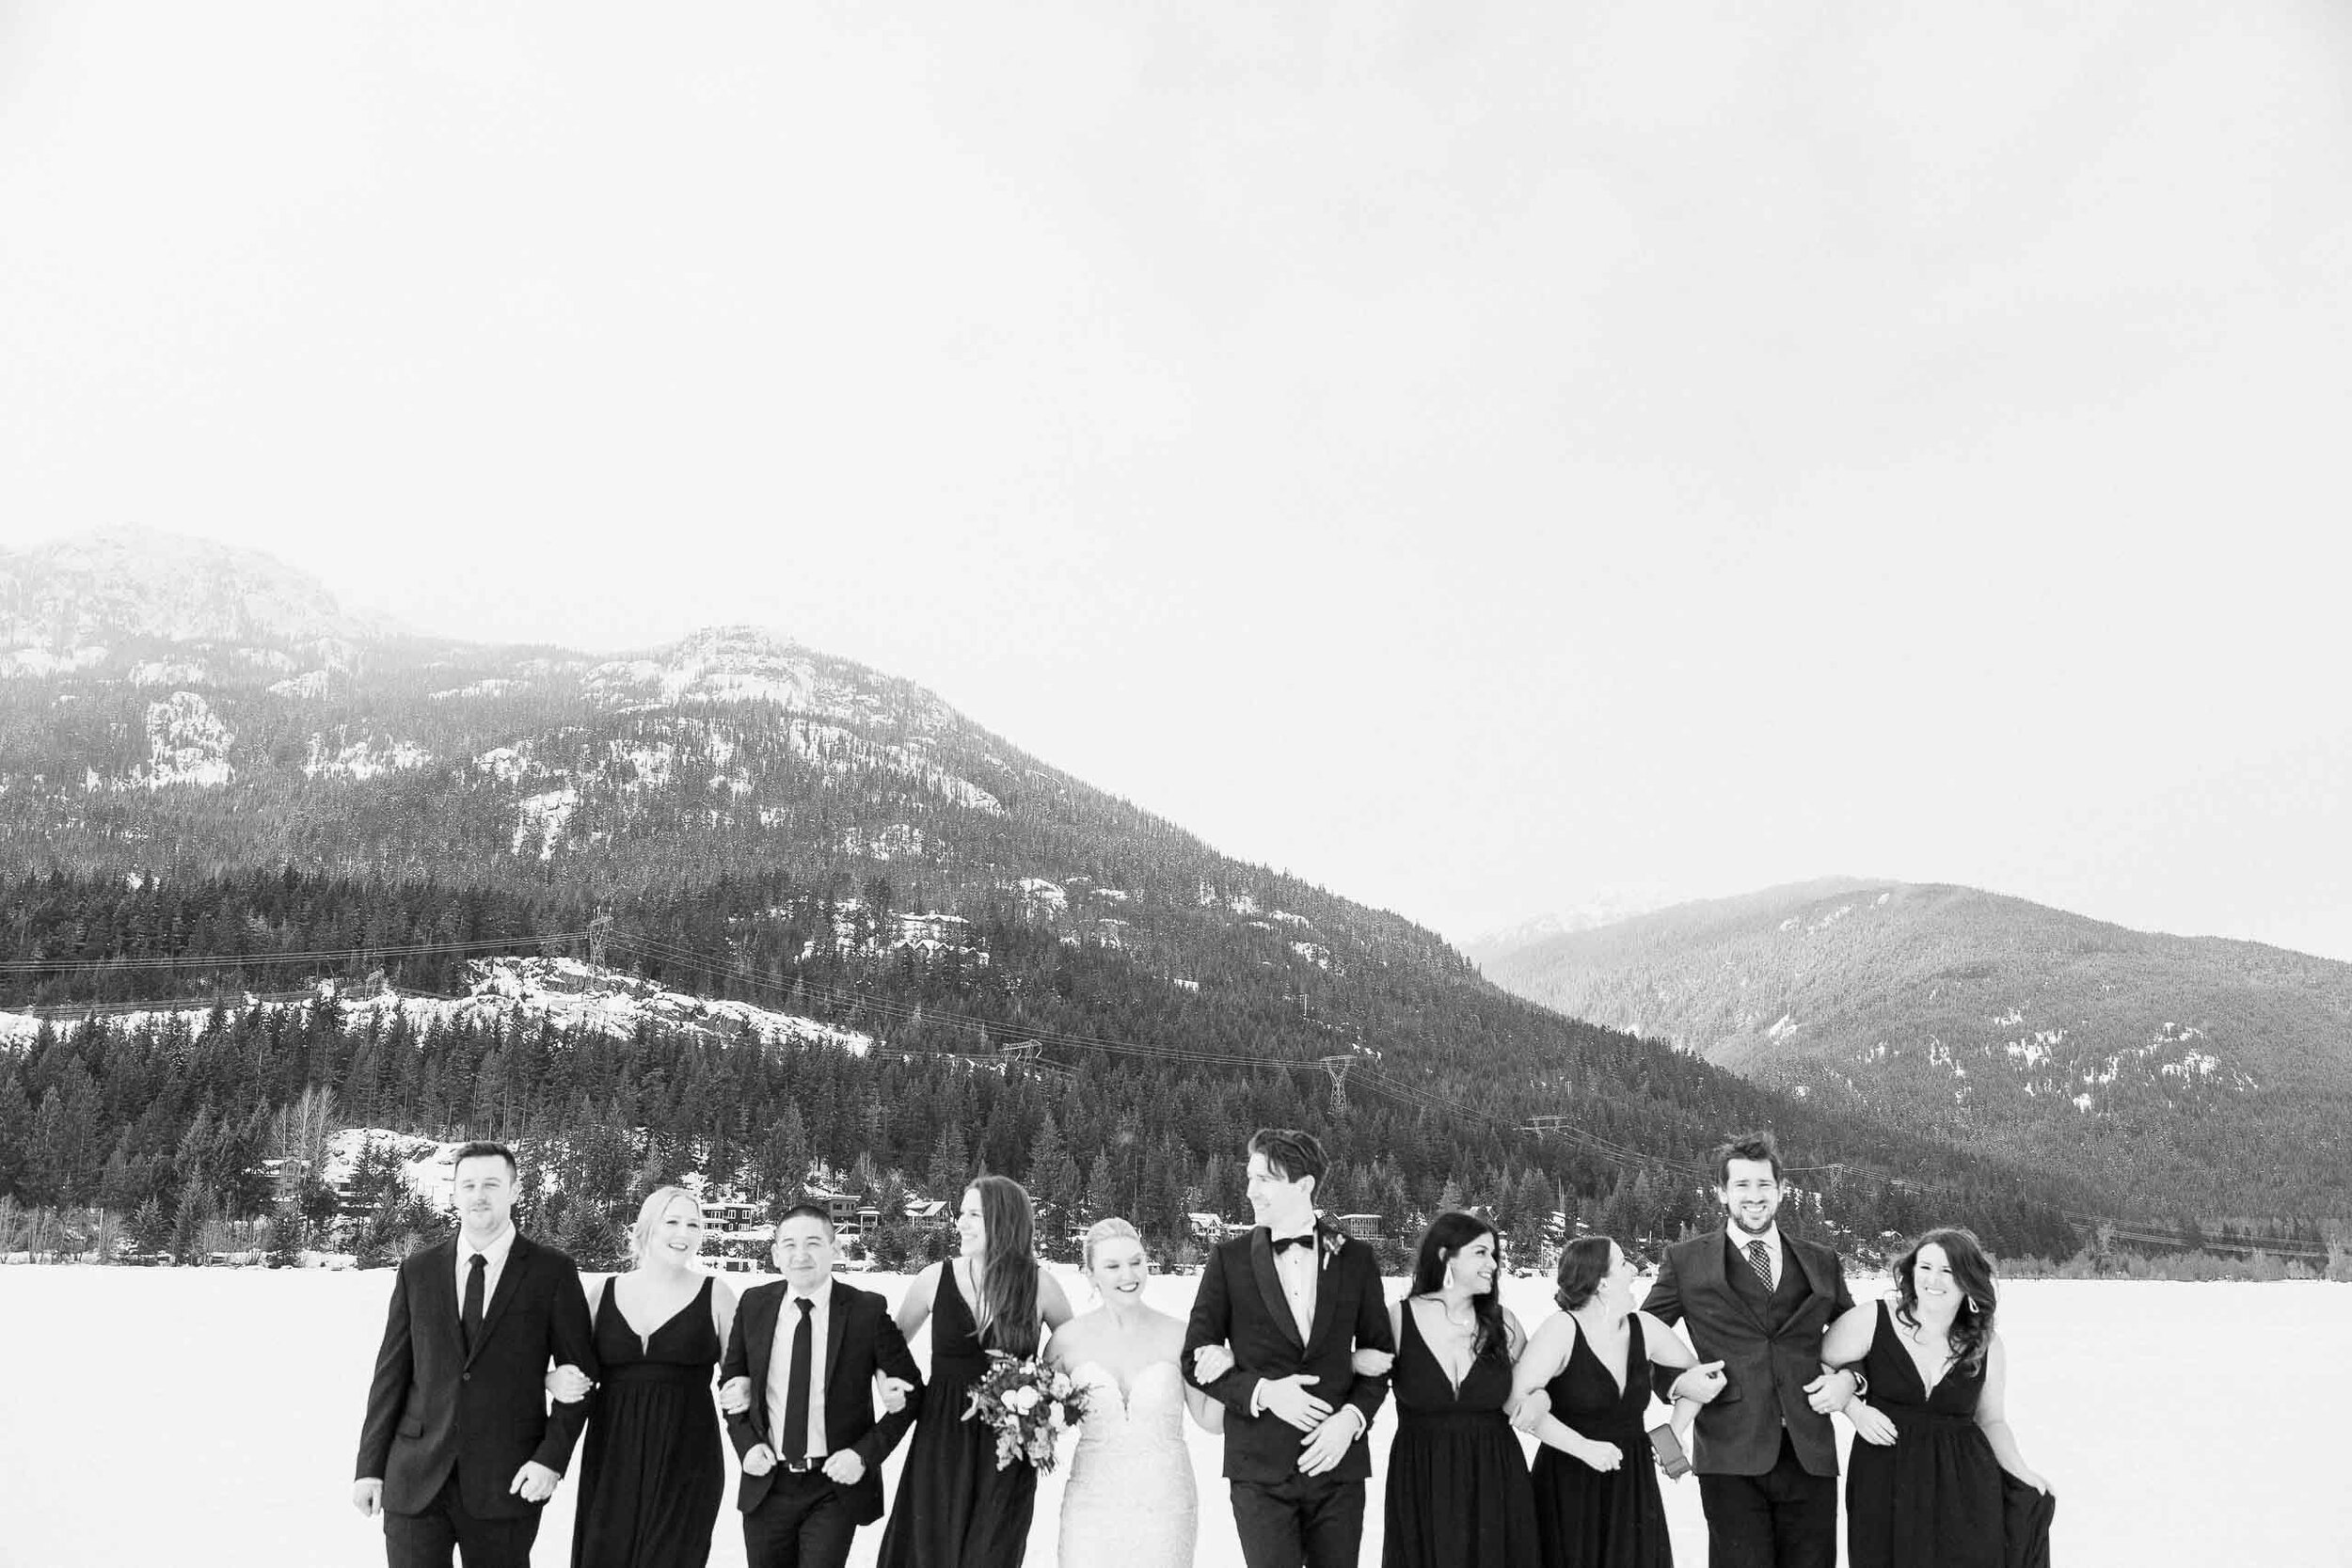 A wedding party strolls arm-in-arm through the snow in Whistler, BC.